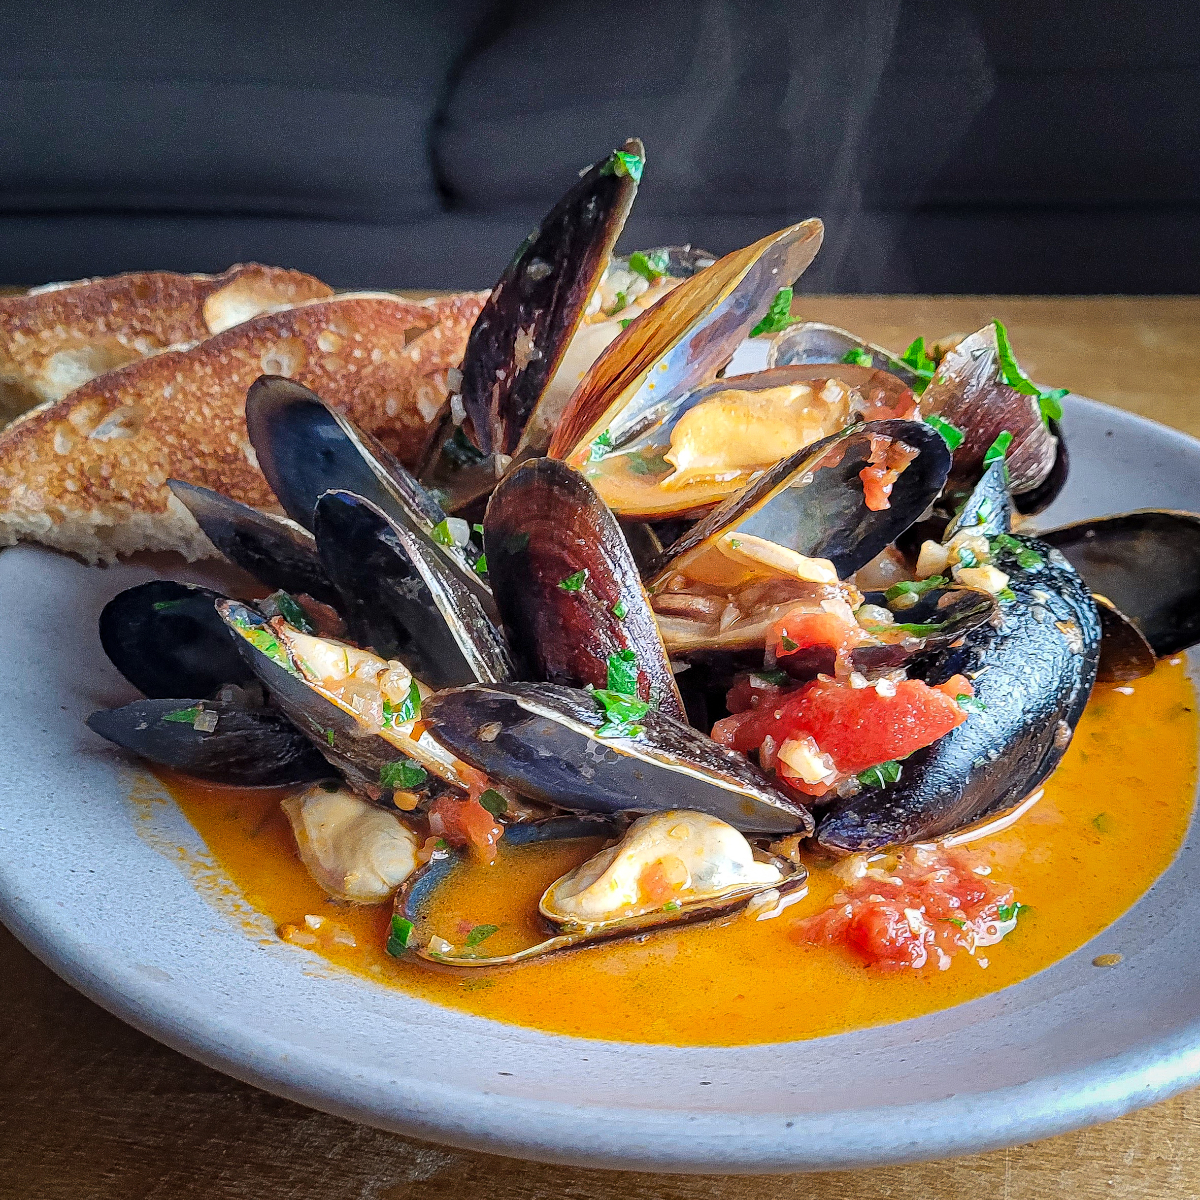 Steamed Mussels with Garlic, Tomato, and Calabrian Chili Pepper